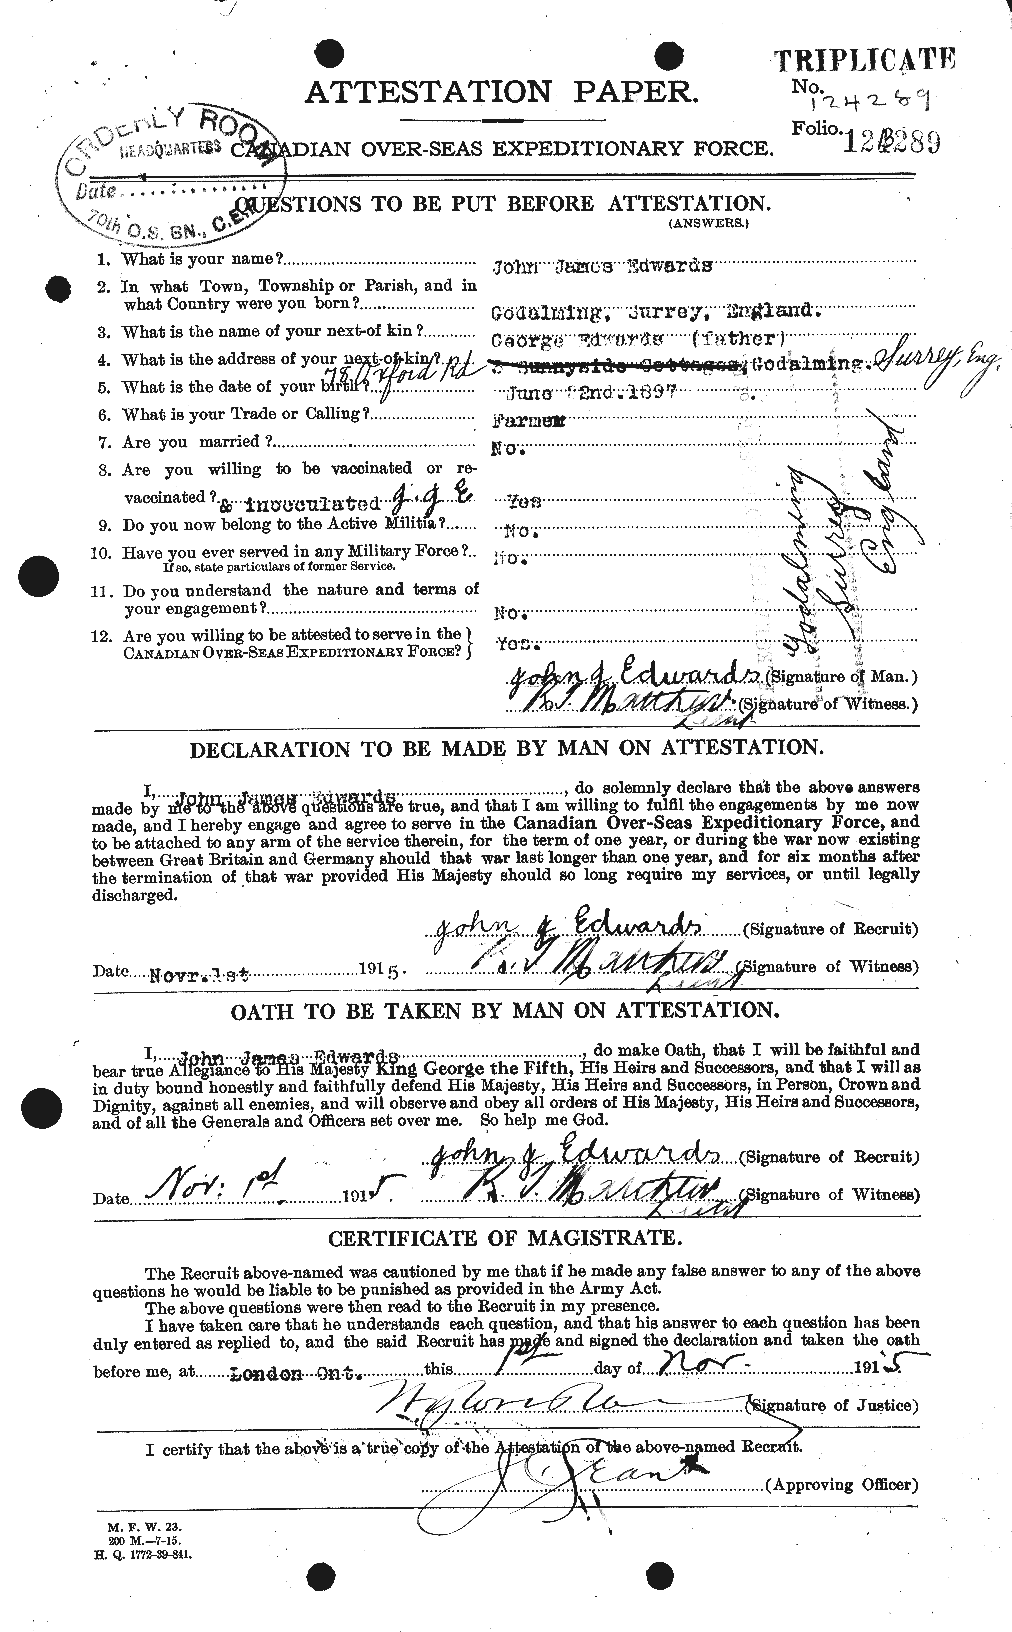 Personnel Records of the First World War - CEF 310140a